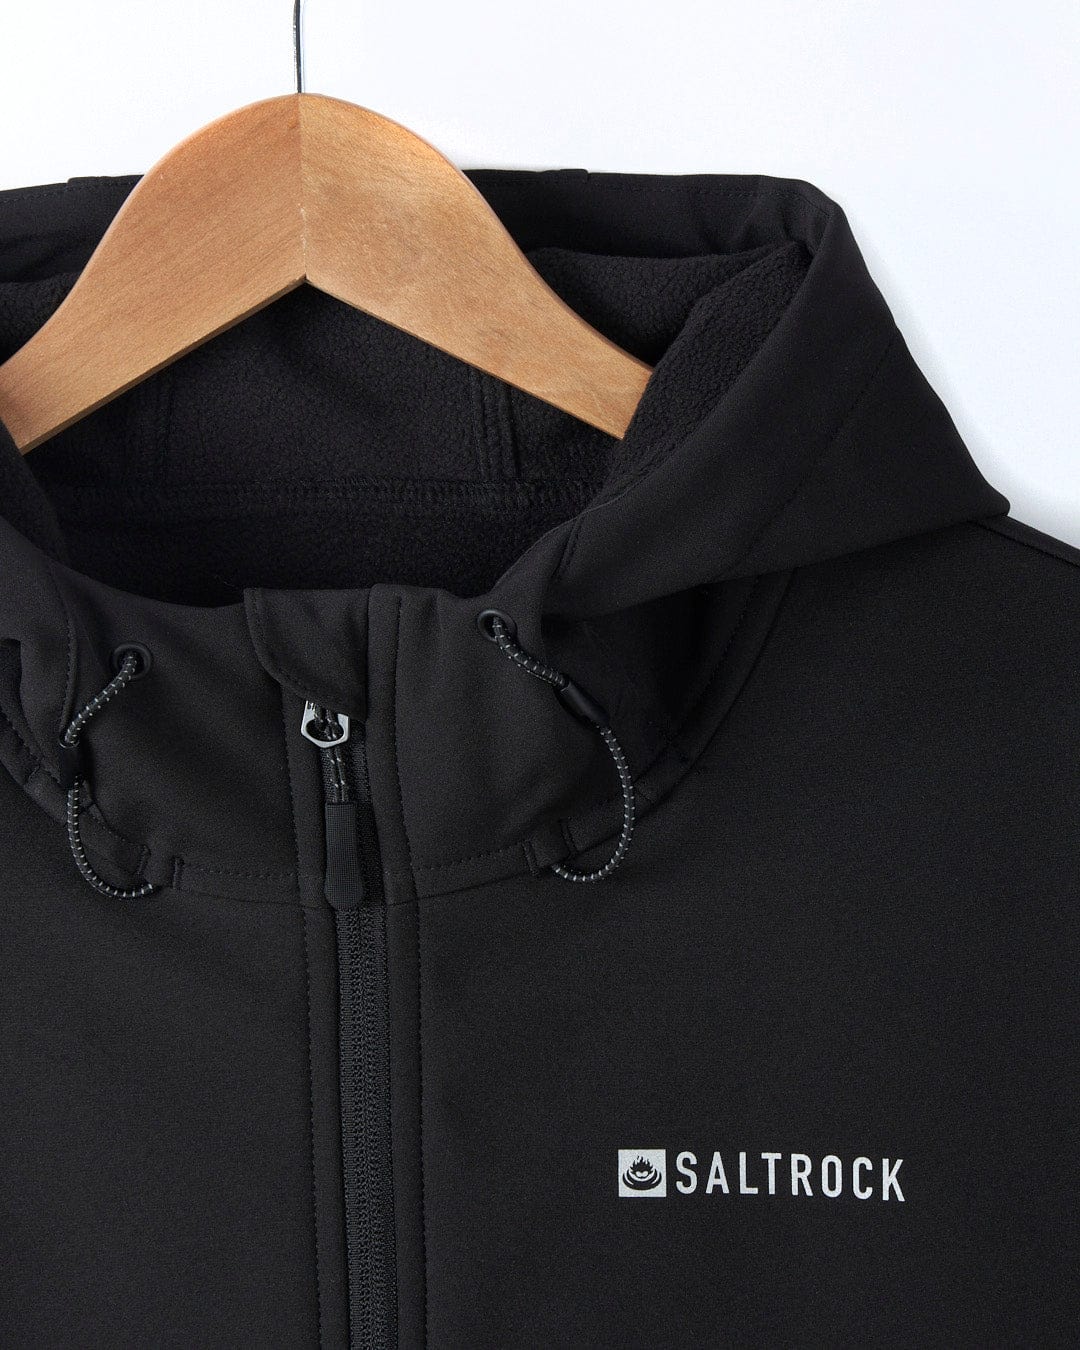 A Saltrock Solar - Womens Softshell Jacket - Black - SS24 with a white logo on it.